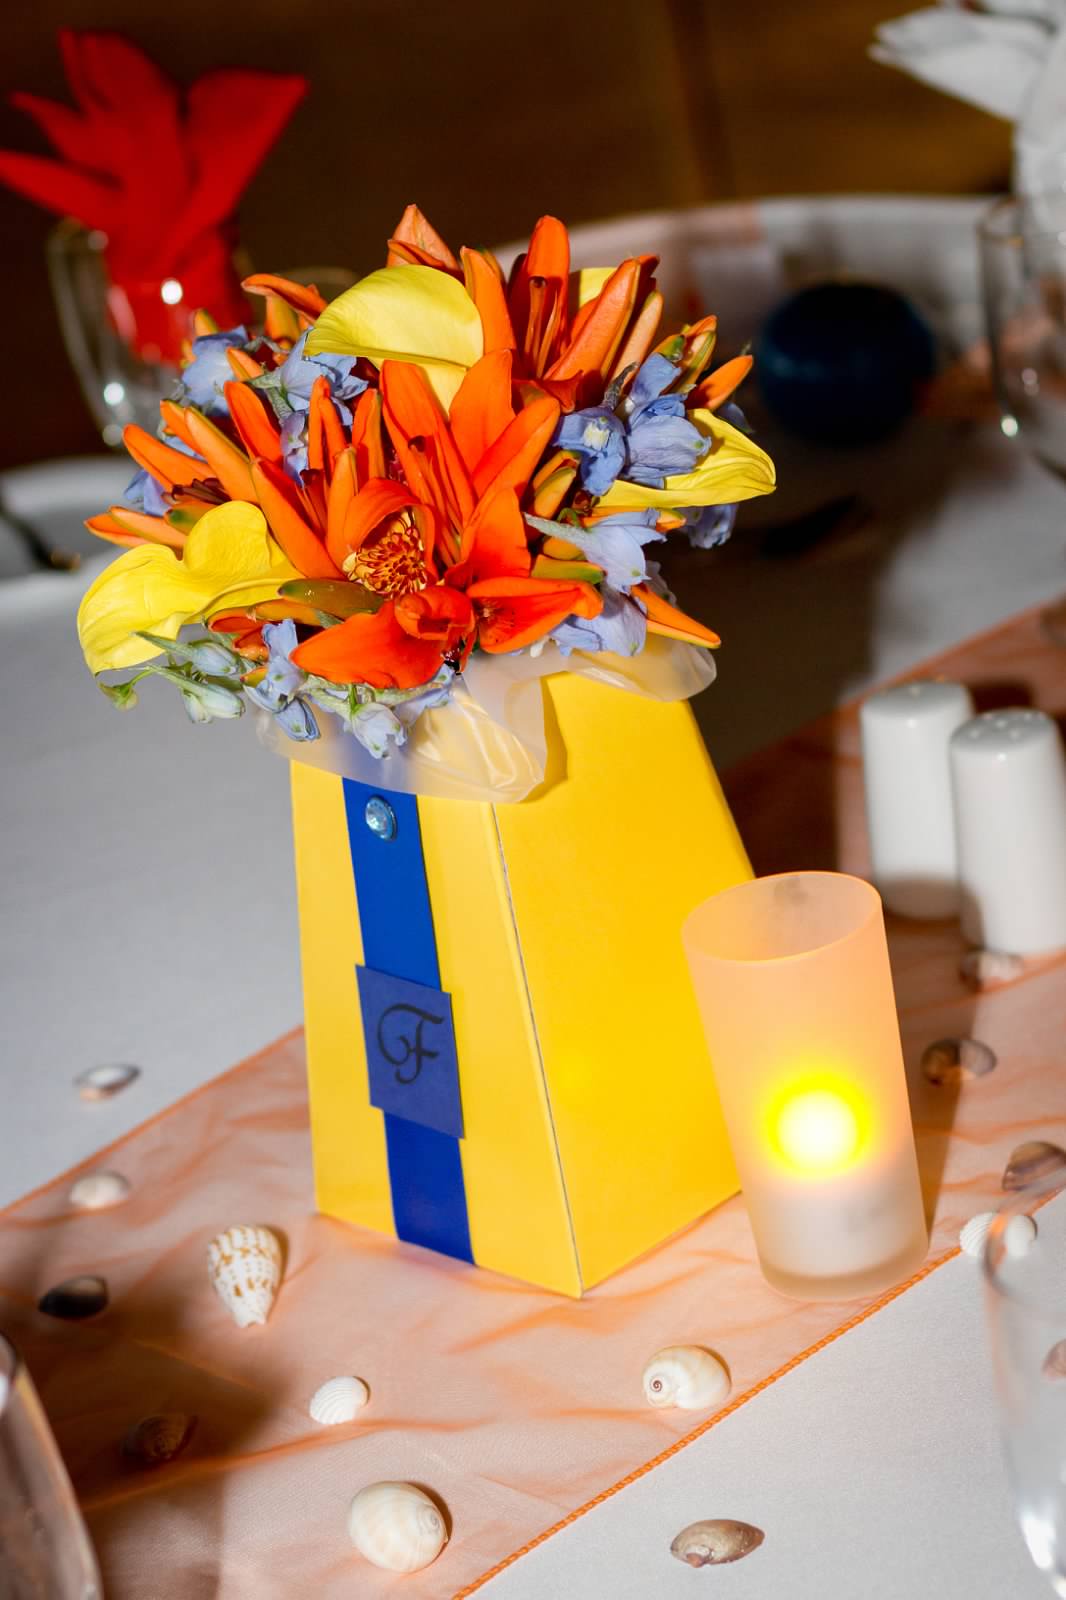 Post your centerpieces here